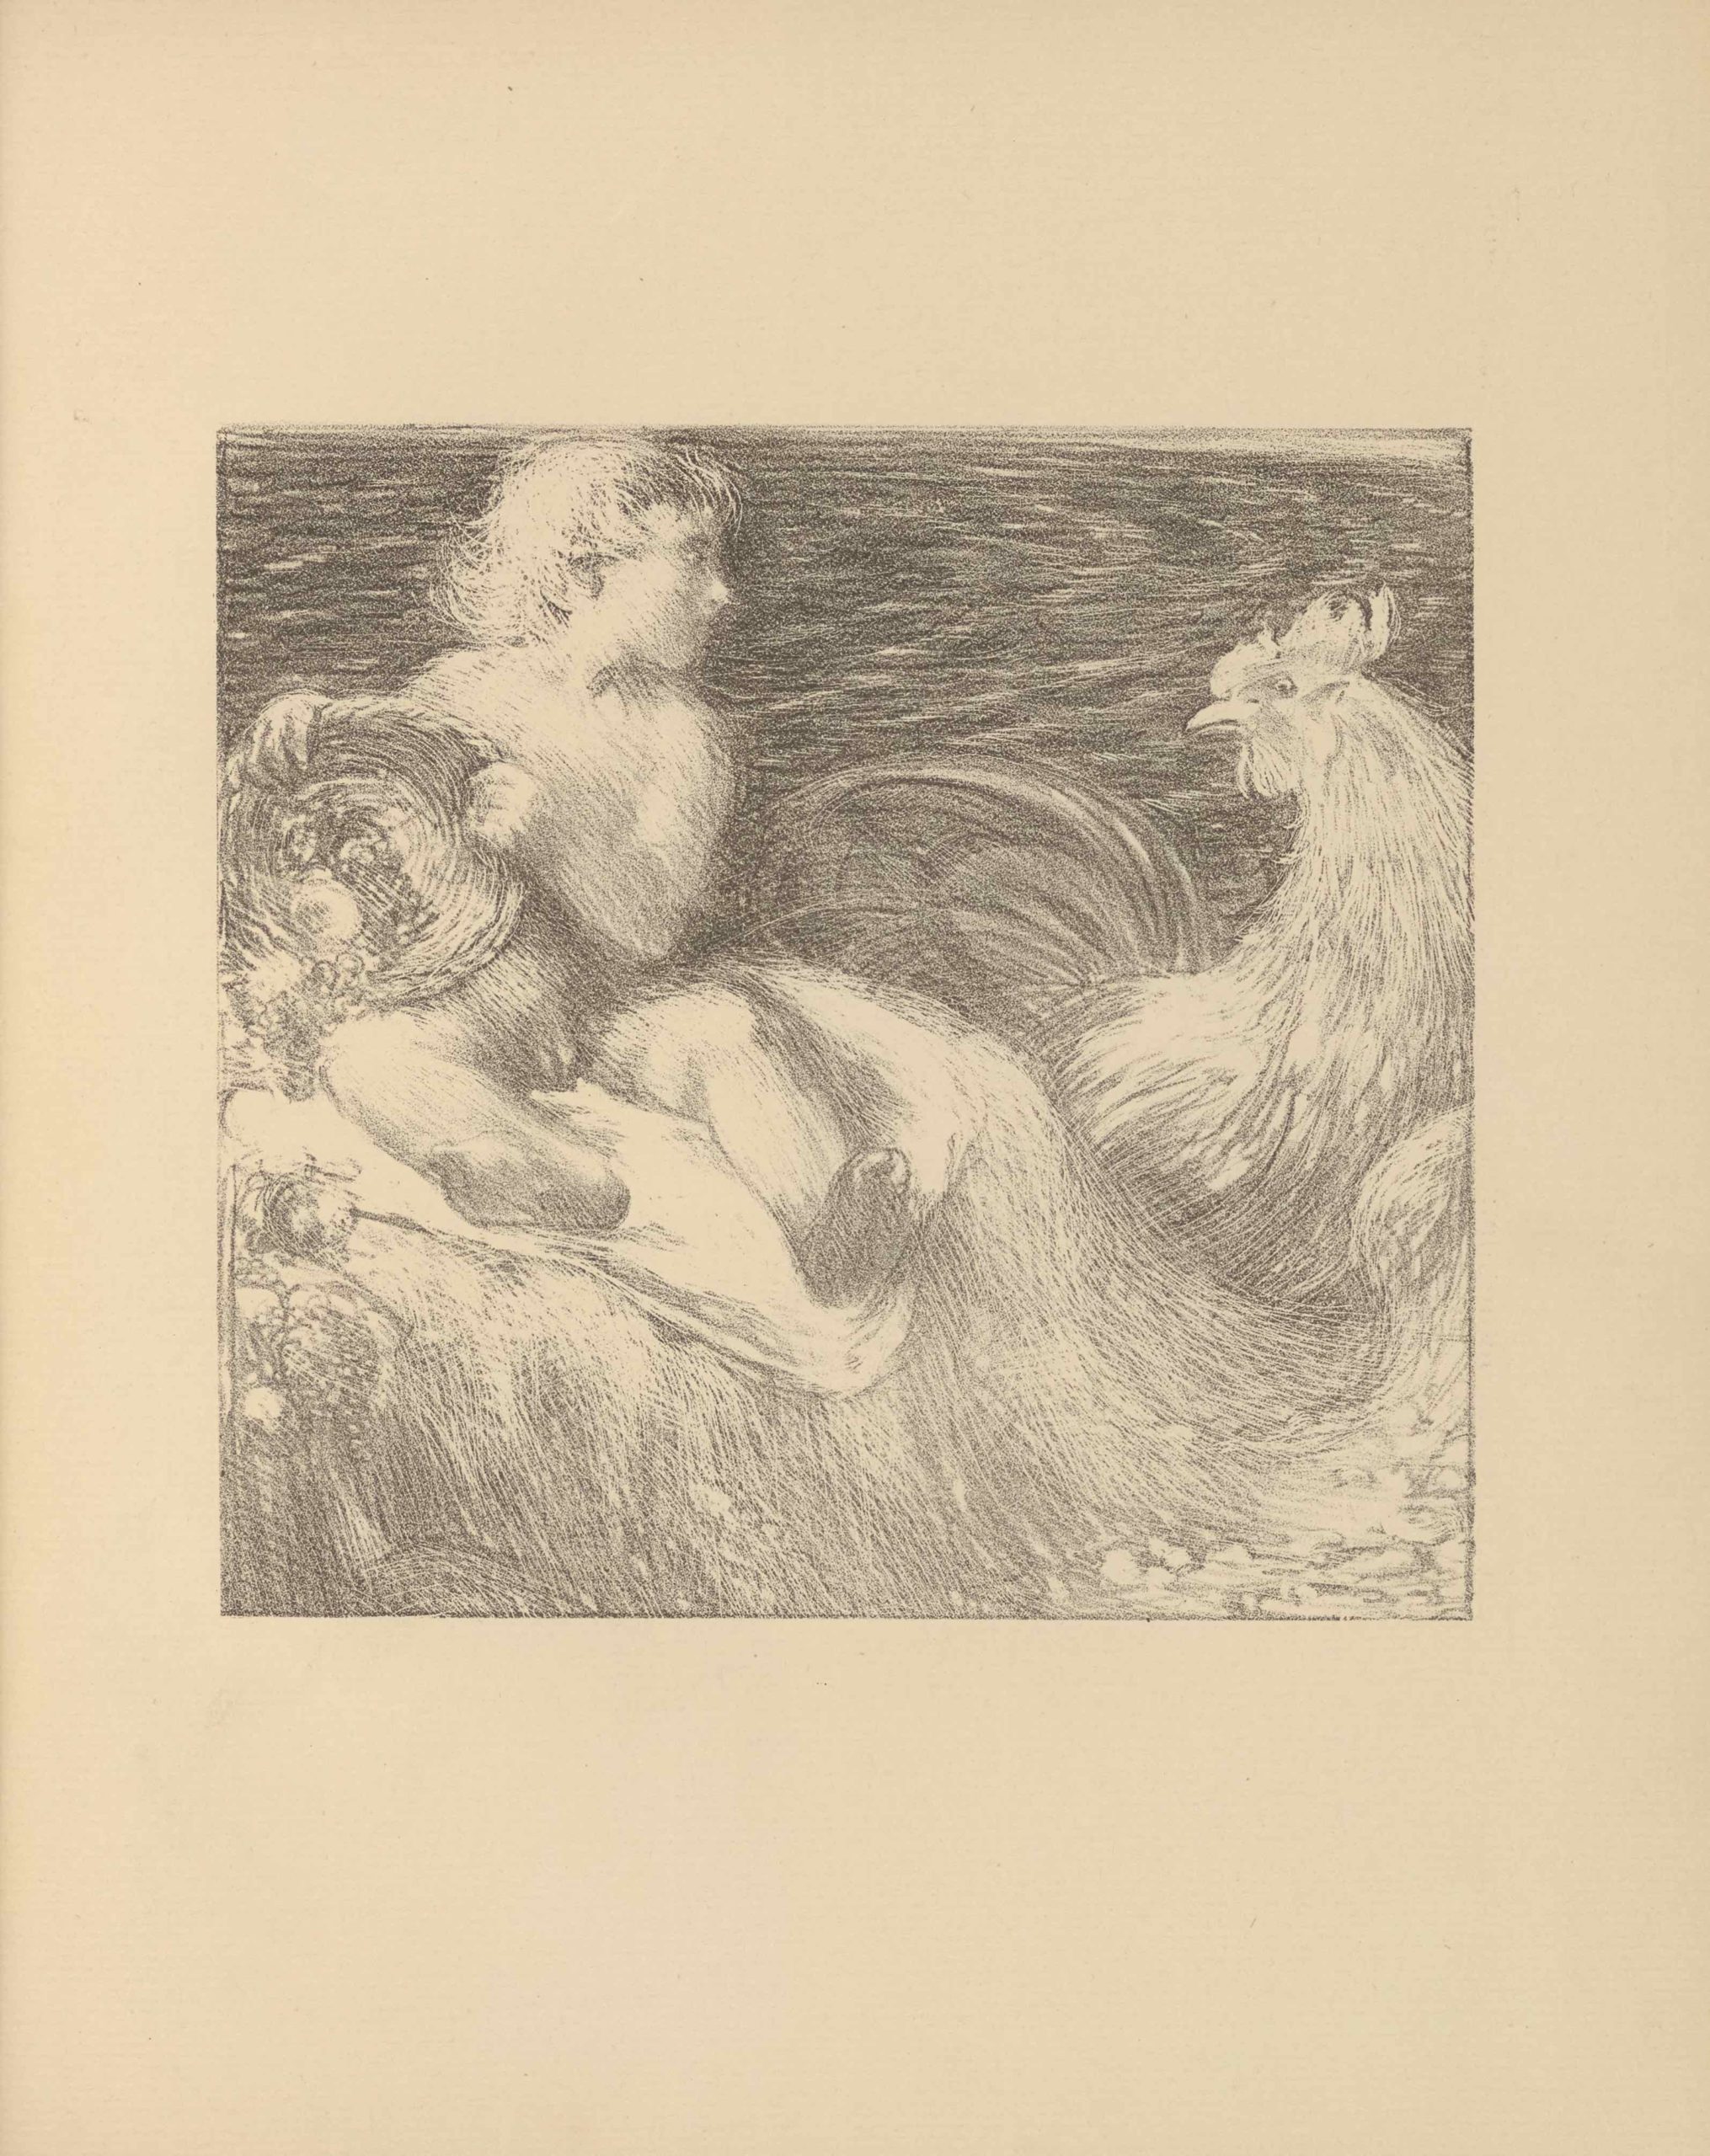 The lithographic image, printed in soft grey tones, is set into a thin, square border, centred on the page. It depicts a naked male child sitting on a blanketed bale of hay on the left side of the image. He looks towards a rooster on his right who looks back at him; both are in profile. The child holds a wicker basket of fruit, which he has spilled. The fruits spill out onto the hay bale in the foreground. The child and rooster are set against a dark background dappled with white lines, suggestive of a pond or water of some kind.